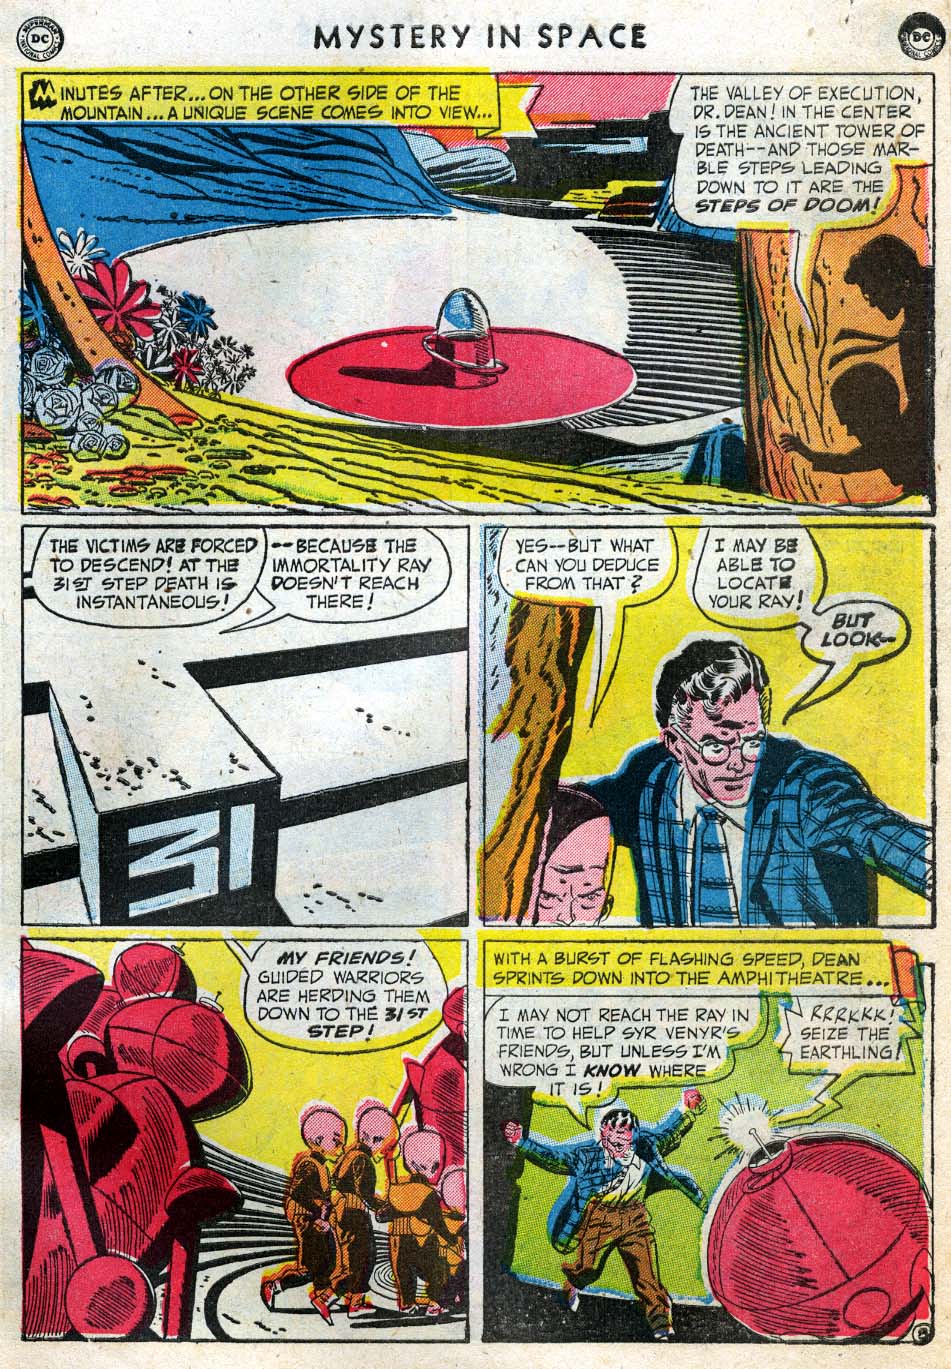 Mystery in Space (1951) 1 Page 46